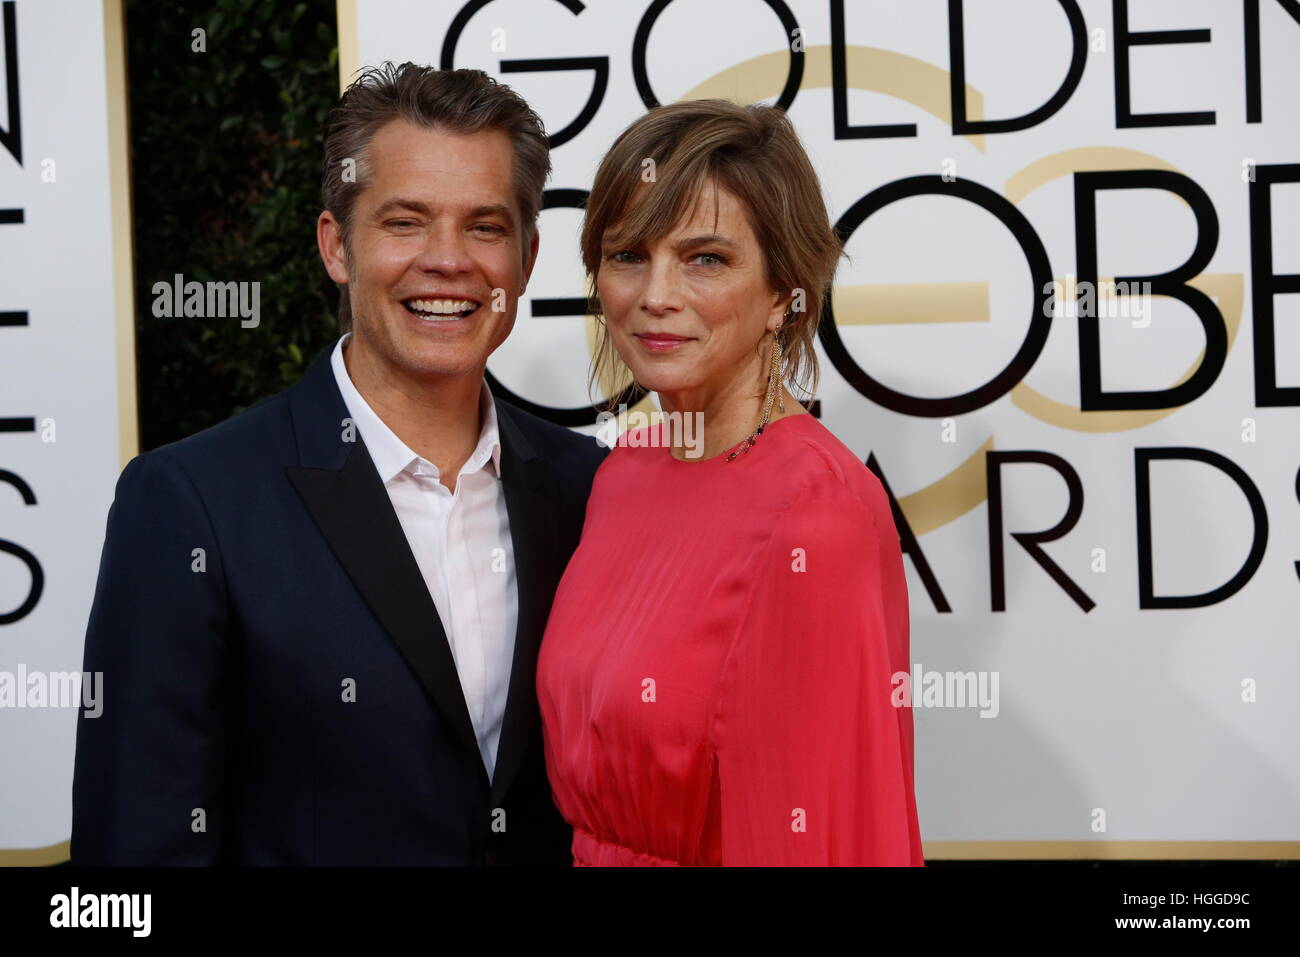 American actor Timothy Olyphant with his wife Alexis Knief